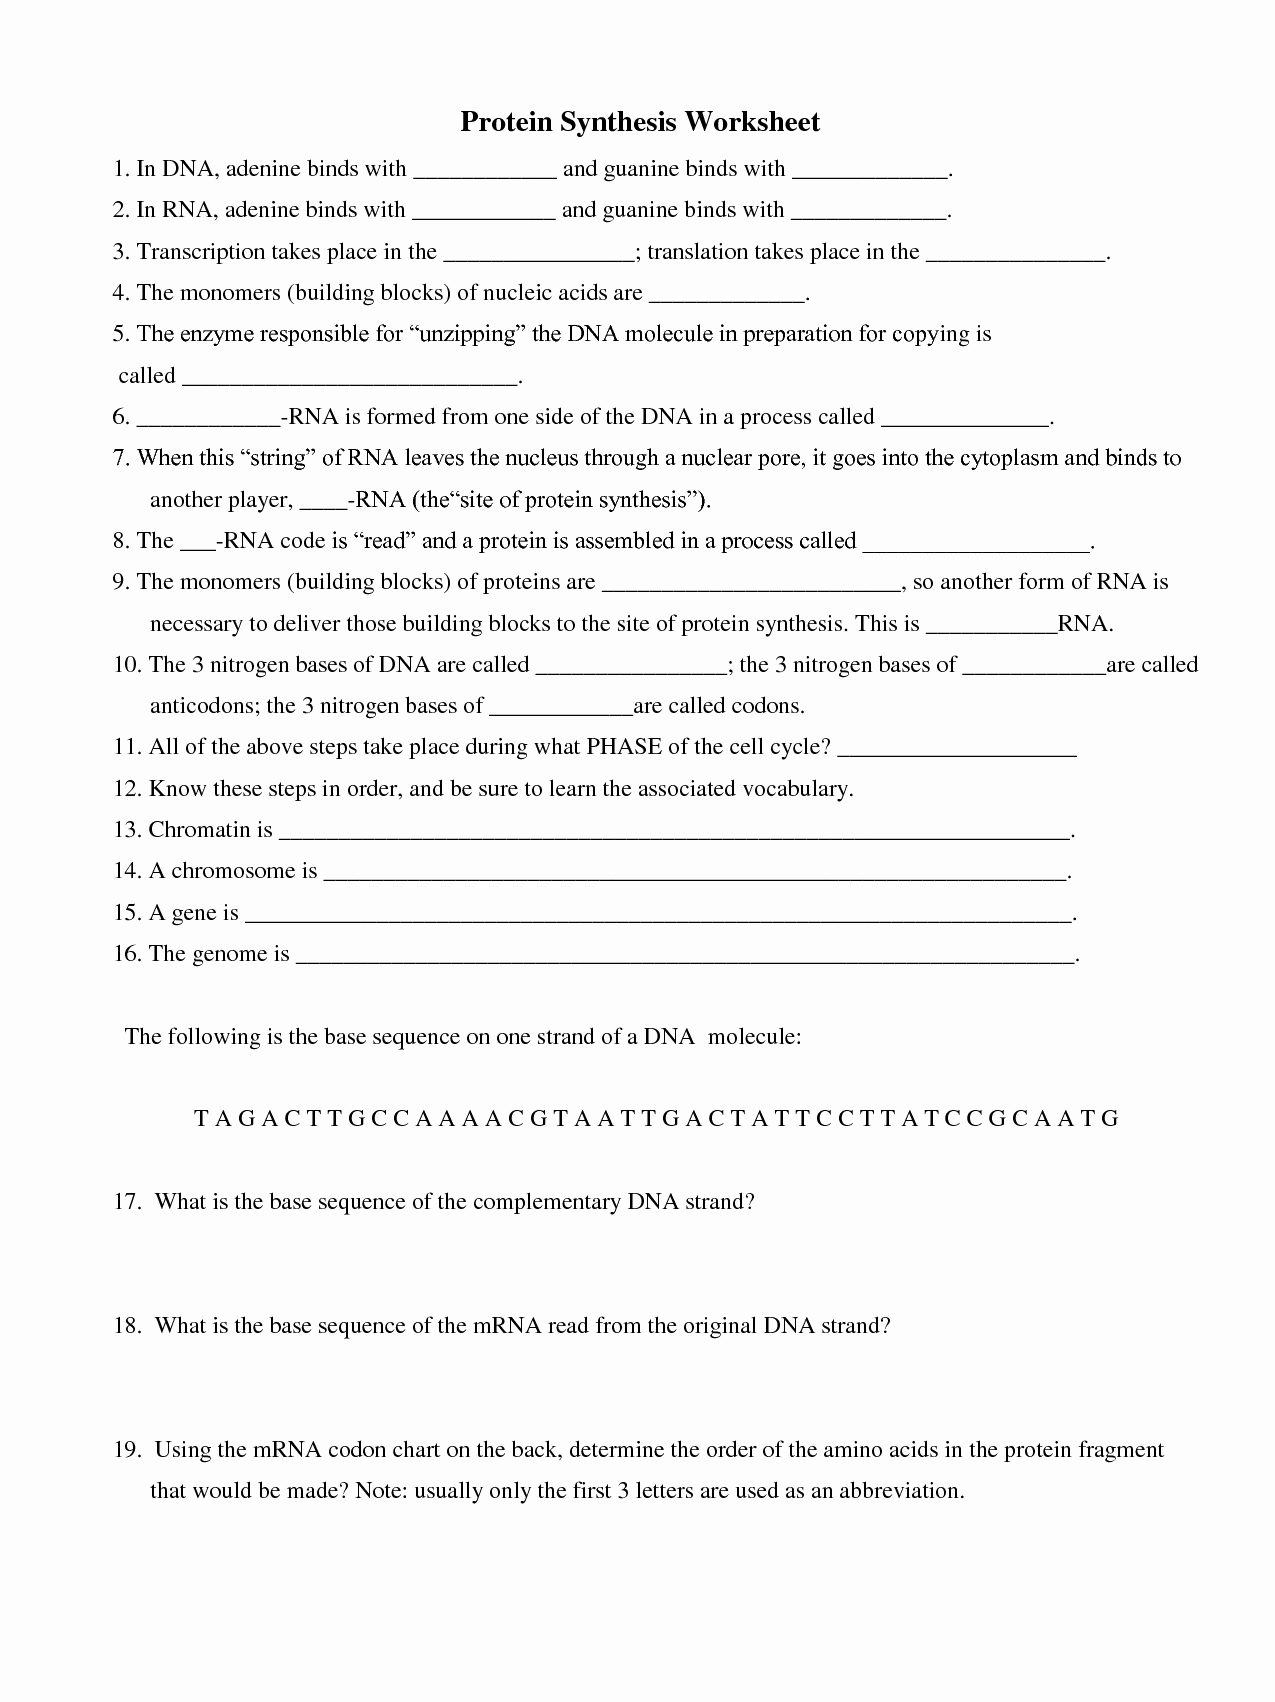 Dna and Rna Worksheet Answers Unique 16 Best Of Dna and Rna Protein Synthesis Worksheet